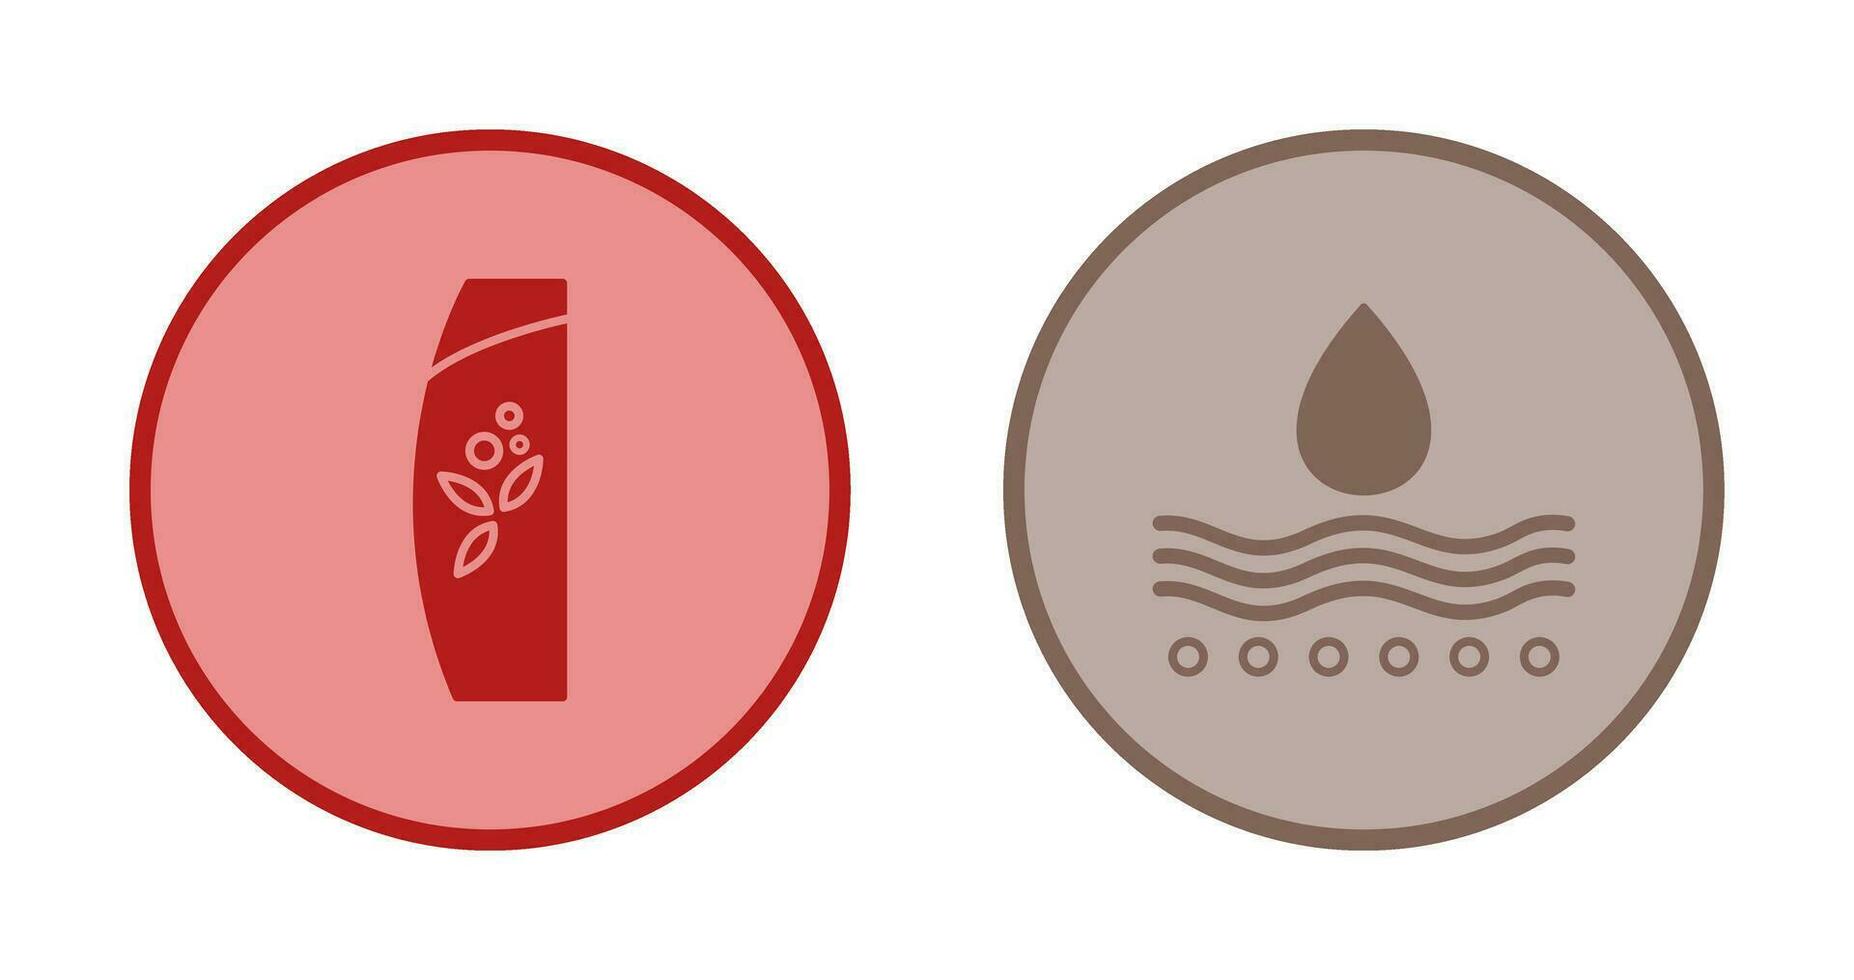 Natural and Moisture Icon vector